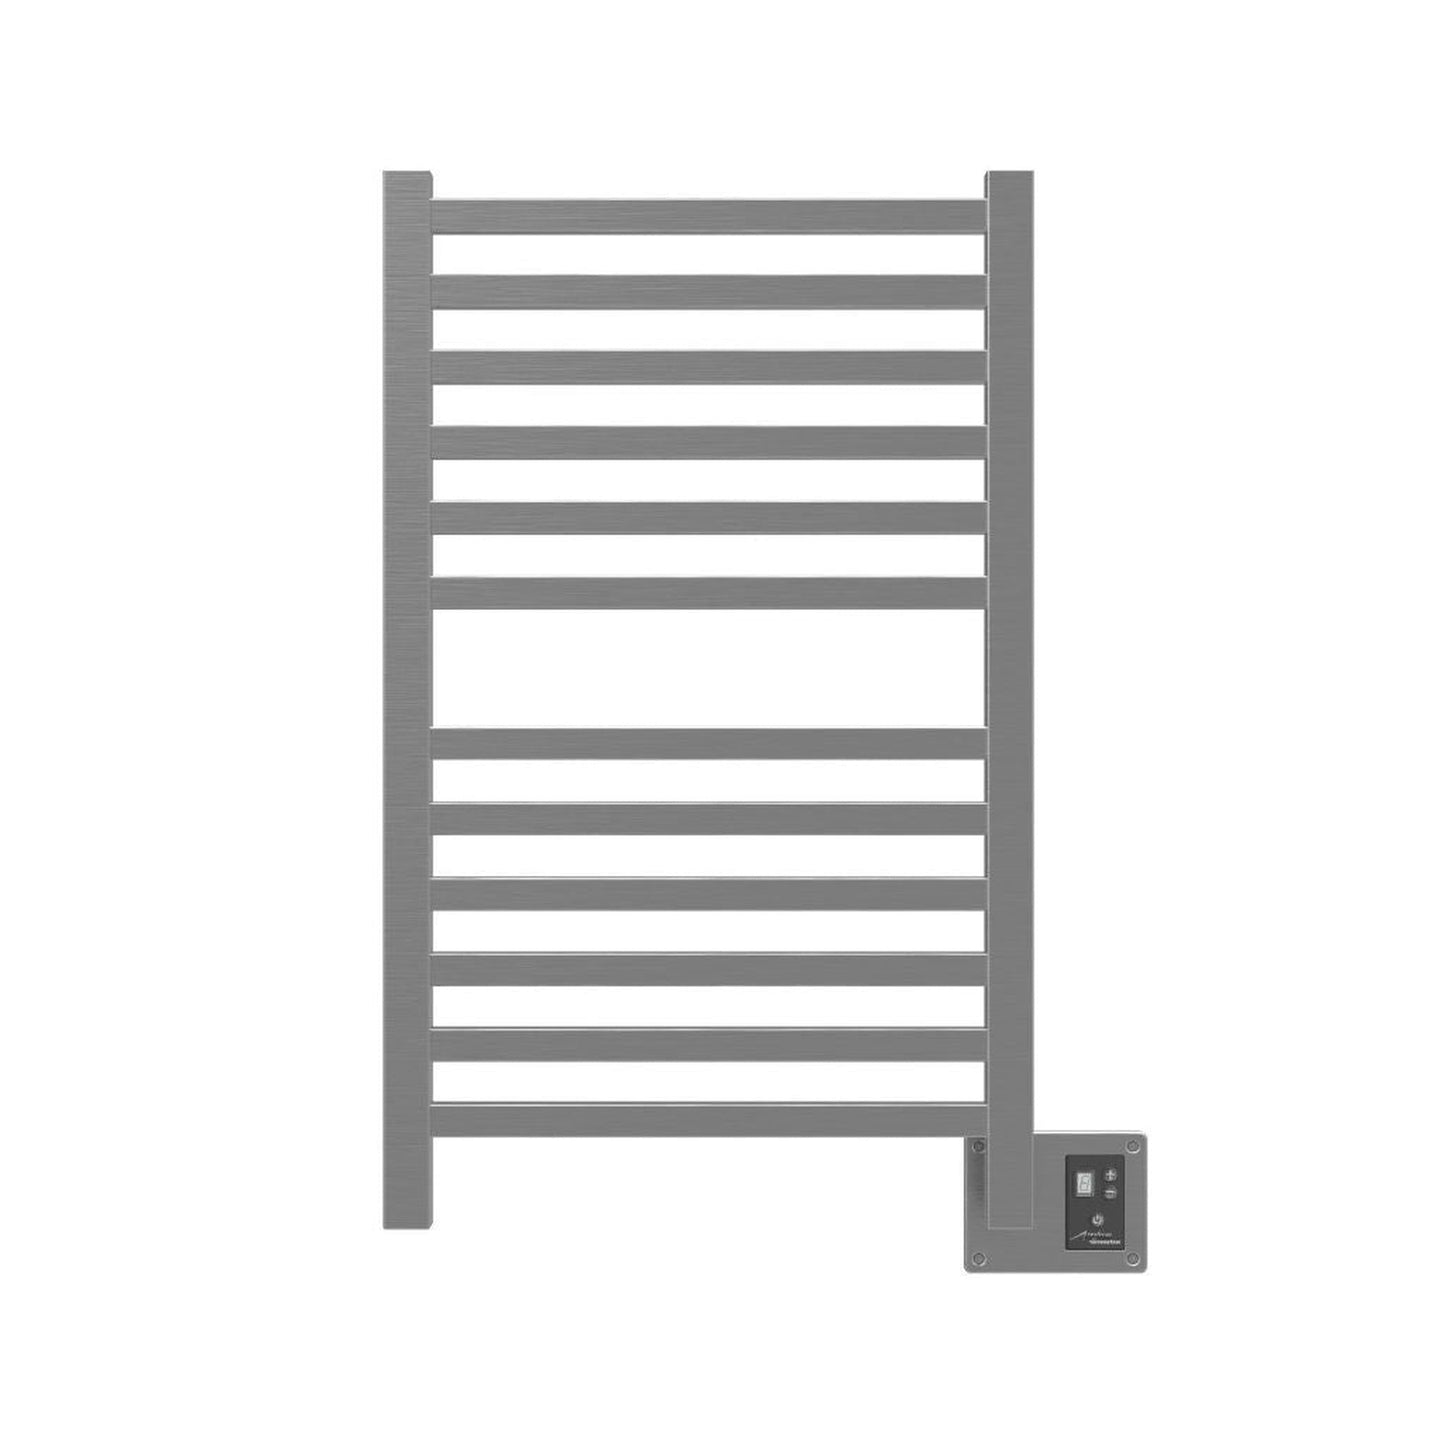 Amba Quadro 20" x 33" 12-Bar Brushed Stainless Steel Hardwired Towel Warmer With Digital Heat Controller